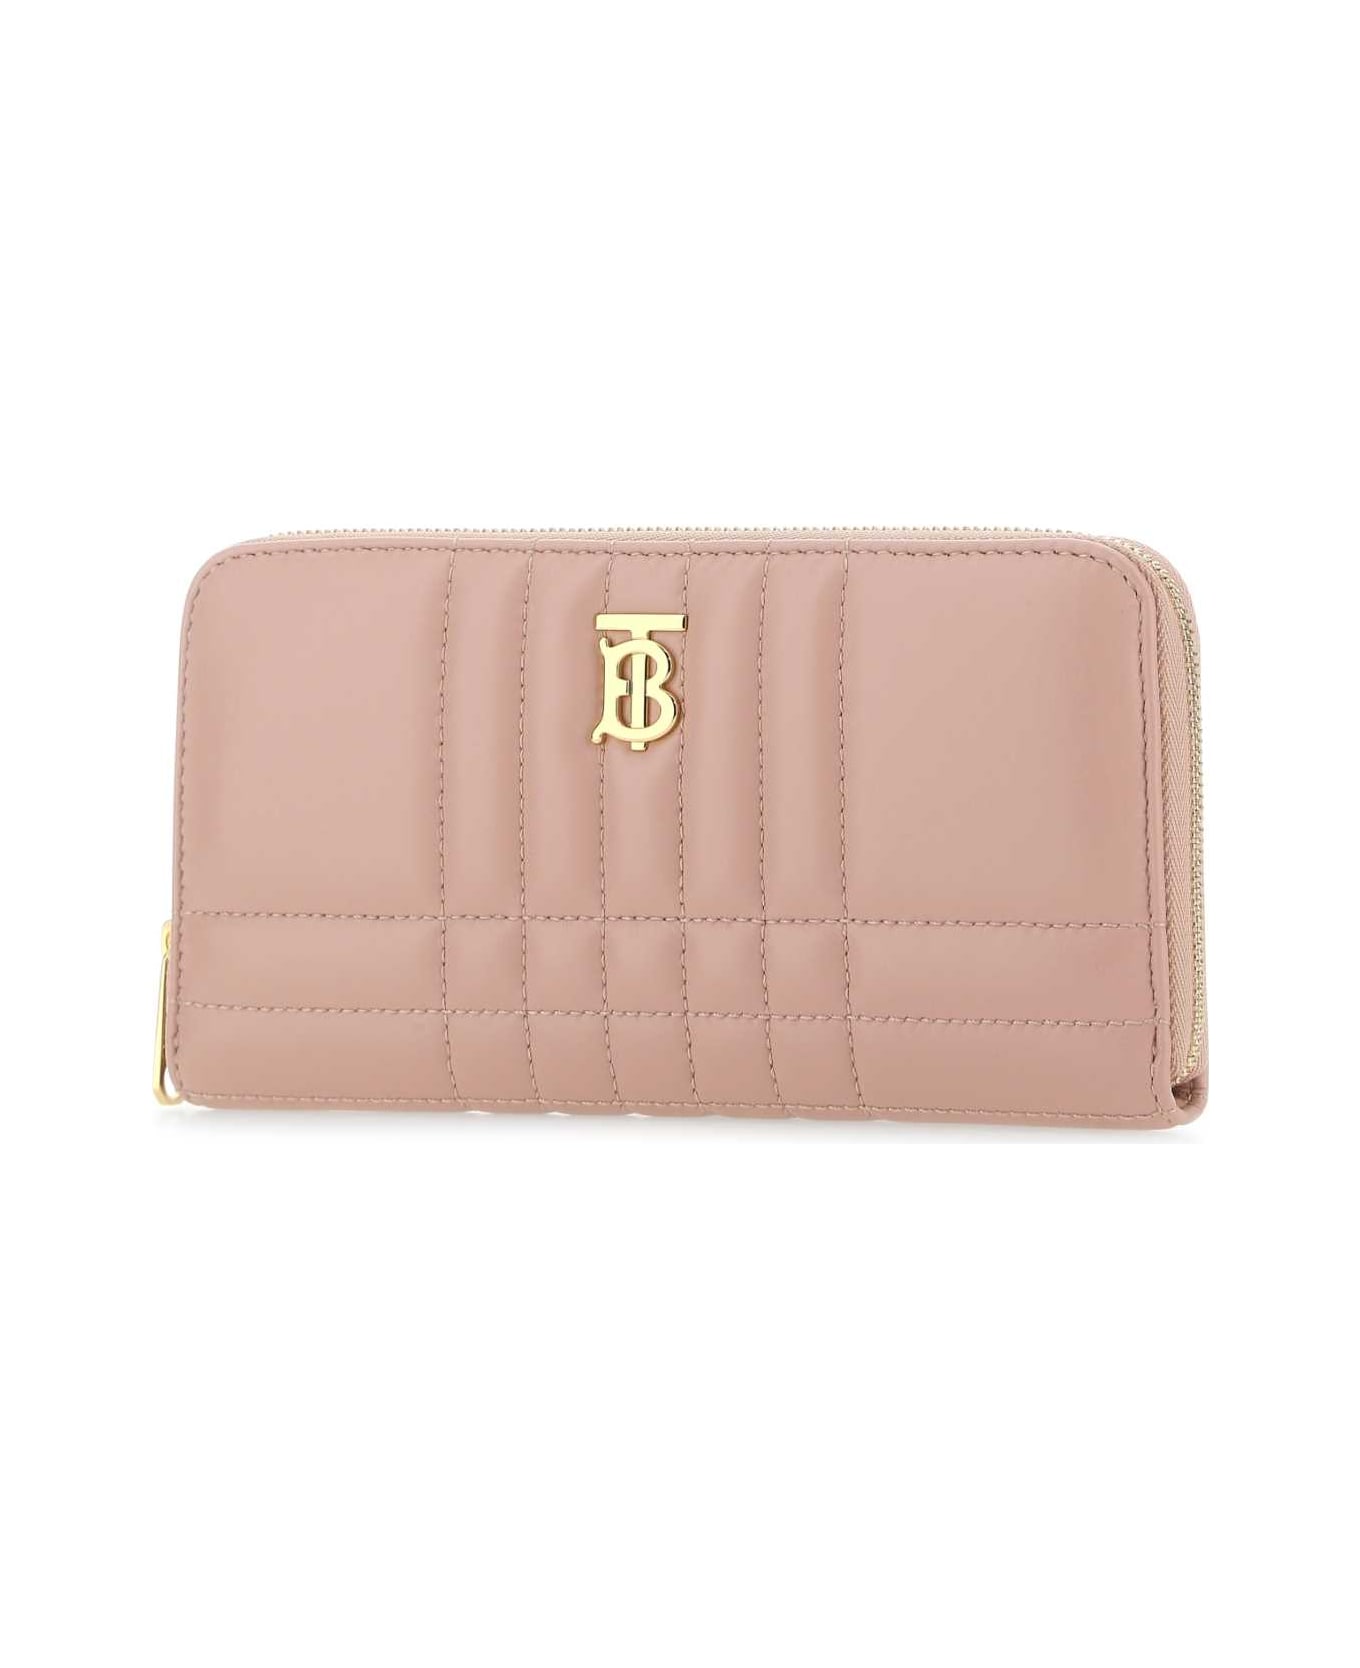 Burberry Pink Nappa Leather Lola Wallet - A3661 財布